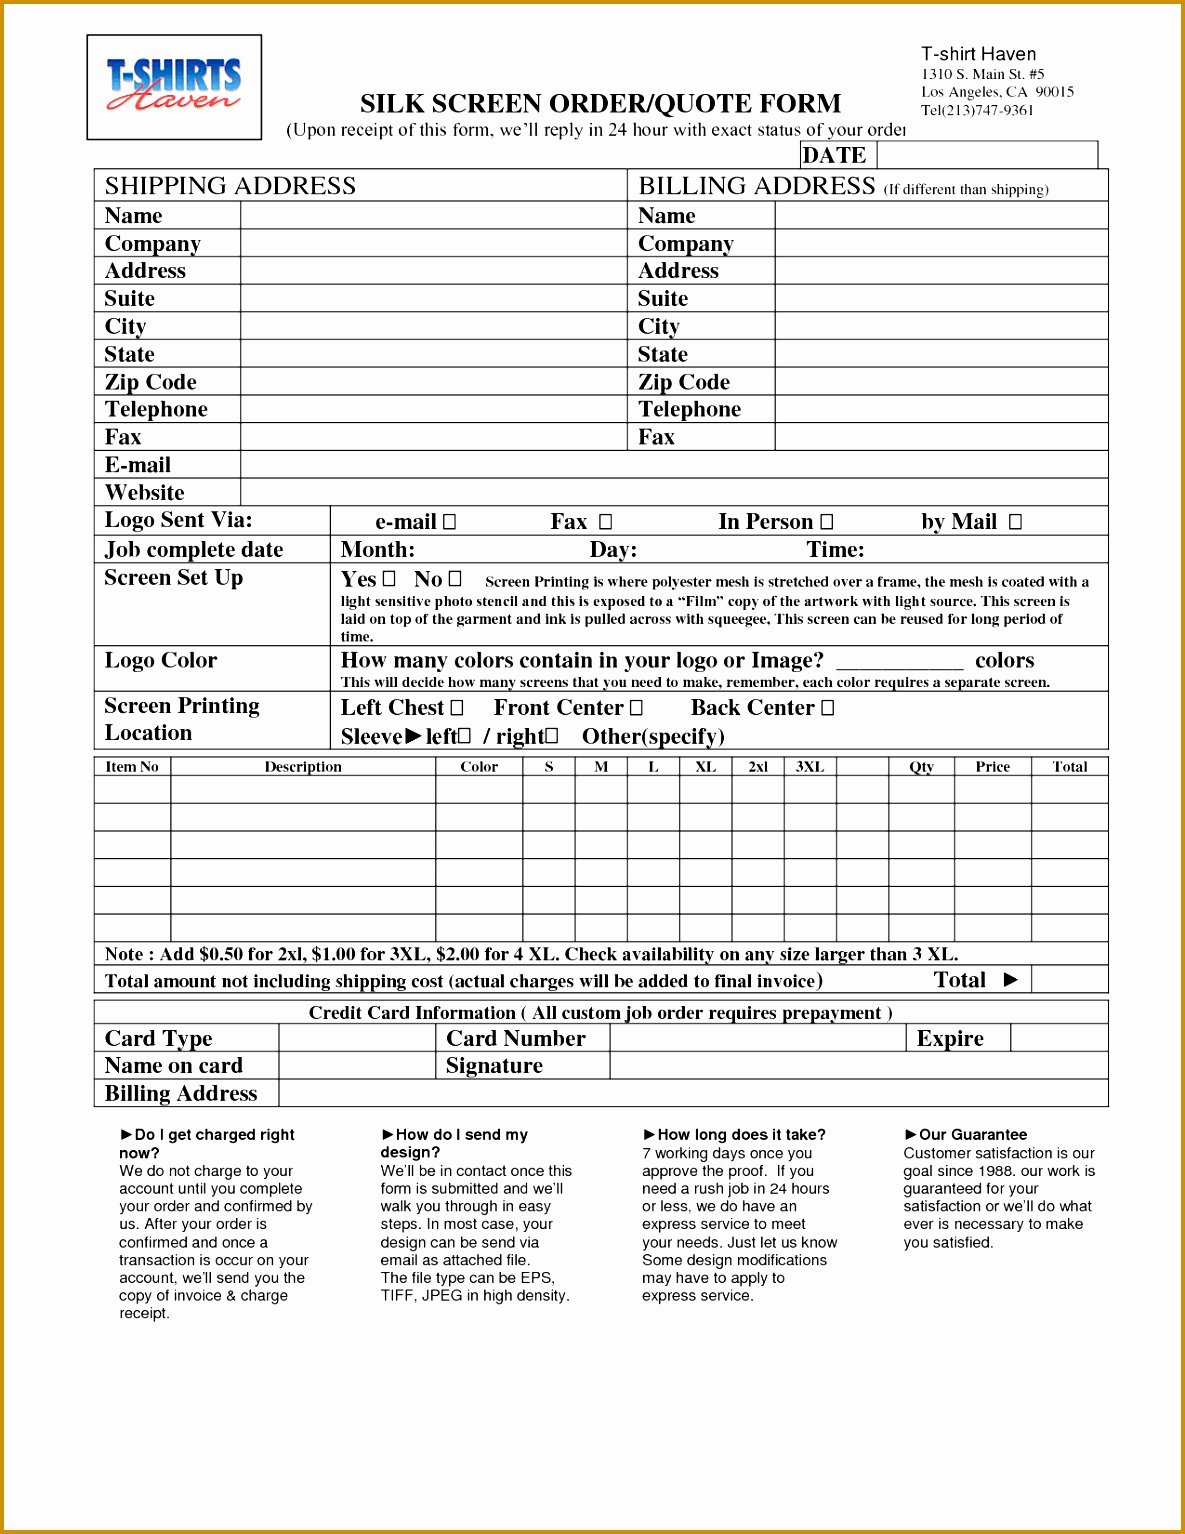 Embroidery order form Template Elegant 6 Back Charge form Template